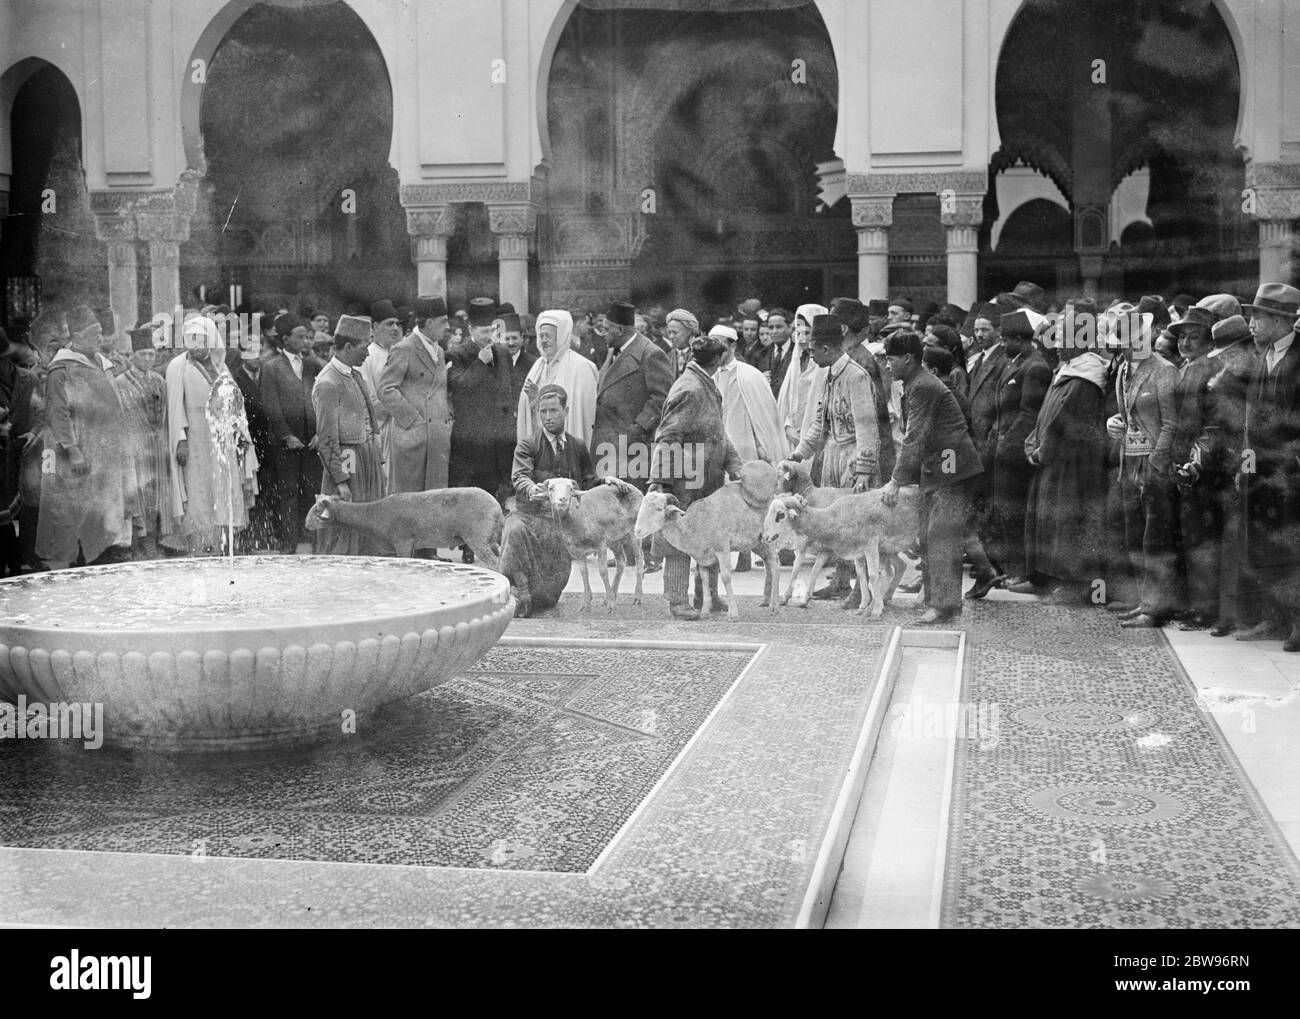 Lambs sacrificed at Muslim festival in Paris . The Muslim festival of Eid Ul Azha , was celebrated at the Paris Mosque , and lambs were offered up for sacrifice . Lambs being presented at the Paris Mosque for sacrifice at the festival . 16 April 1932 . Stock Photo